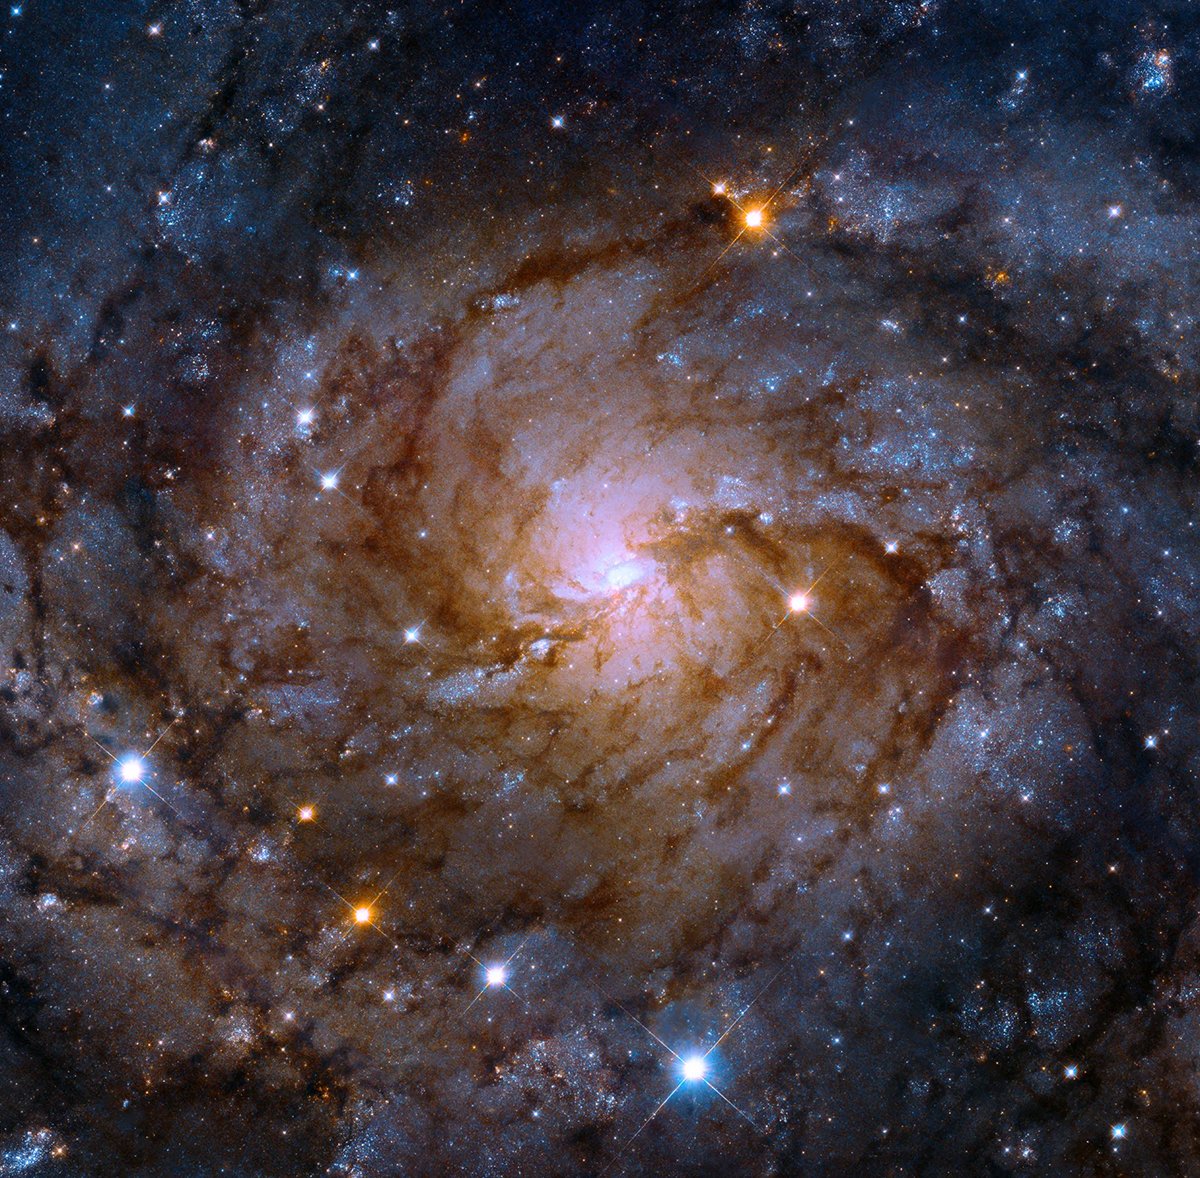 A high-resolution image of a spiral galaxy, with vibrant clusters of stars and swirling cosmic dust, radiating outward from a bright central core. The galaxy's arms stretch across the vastness of space, exemplifying the stoic belief in the insignificance of human troubles in the face of the universe's immensity.